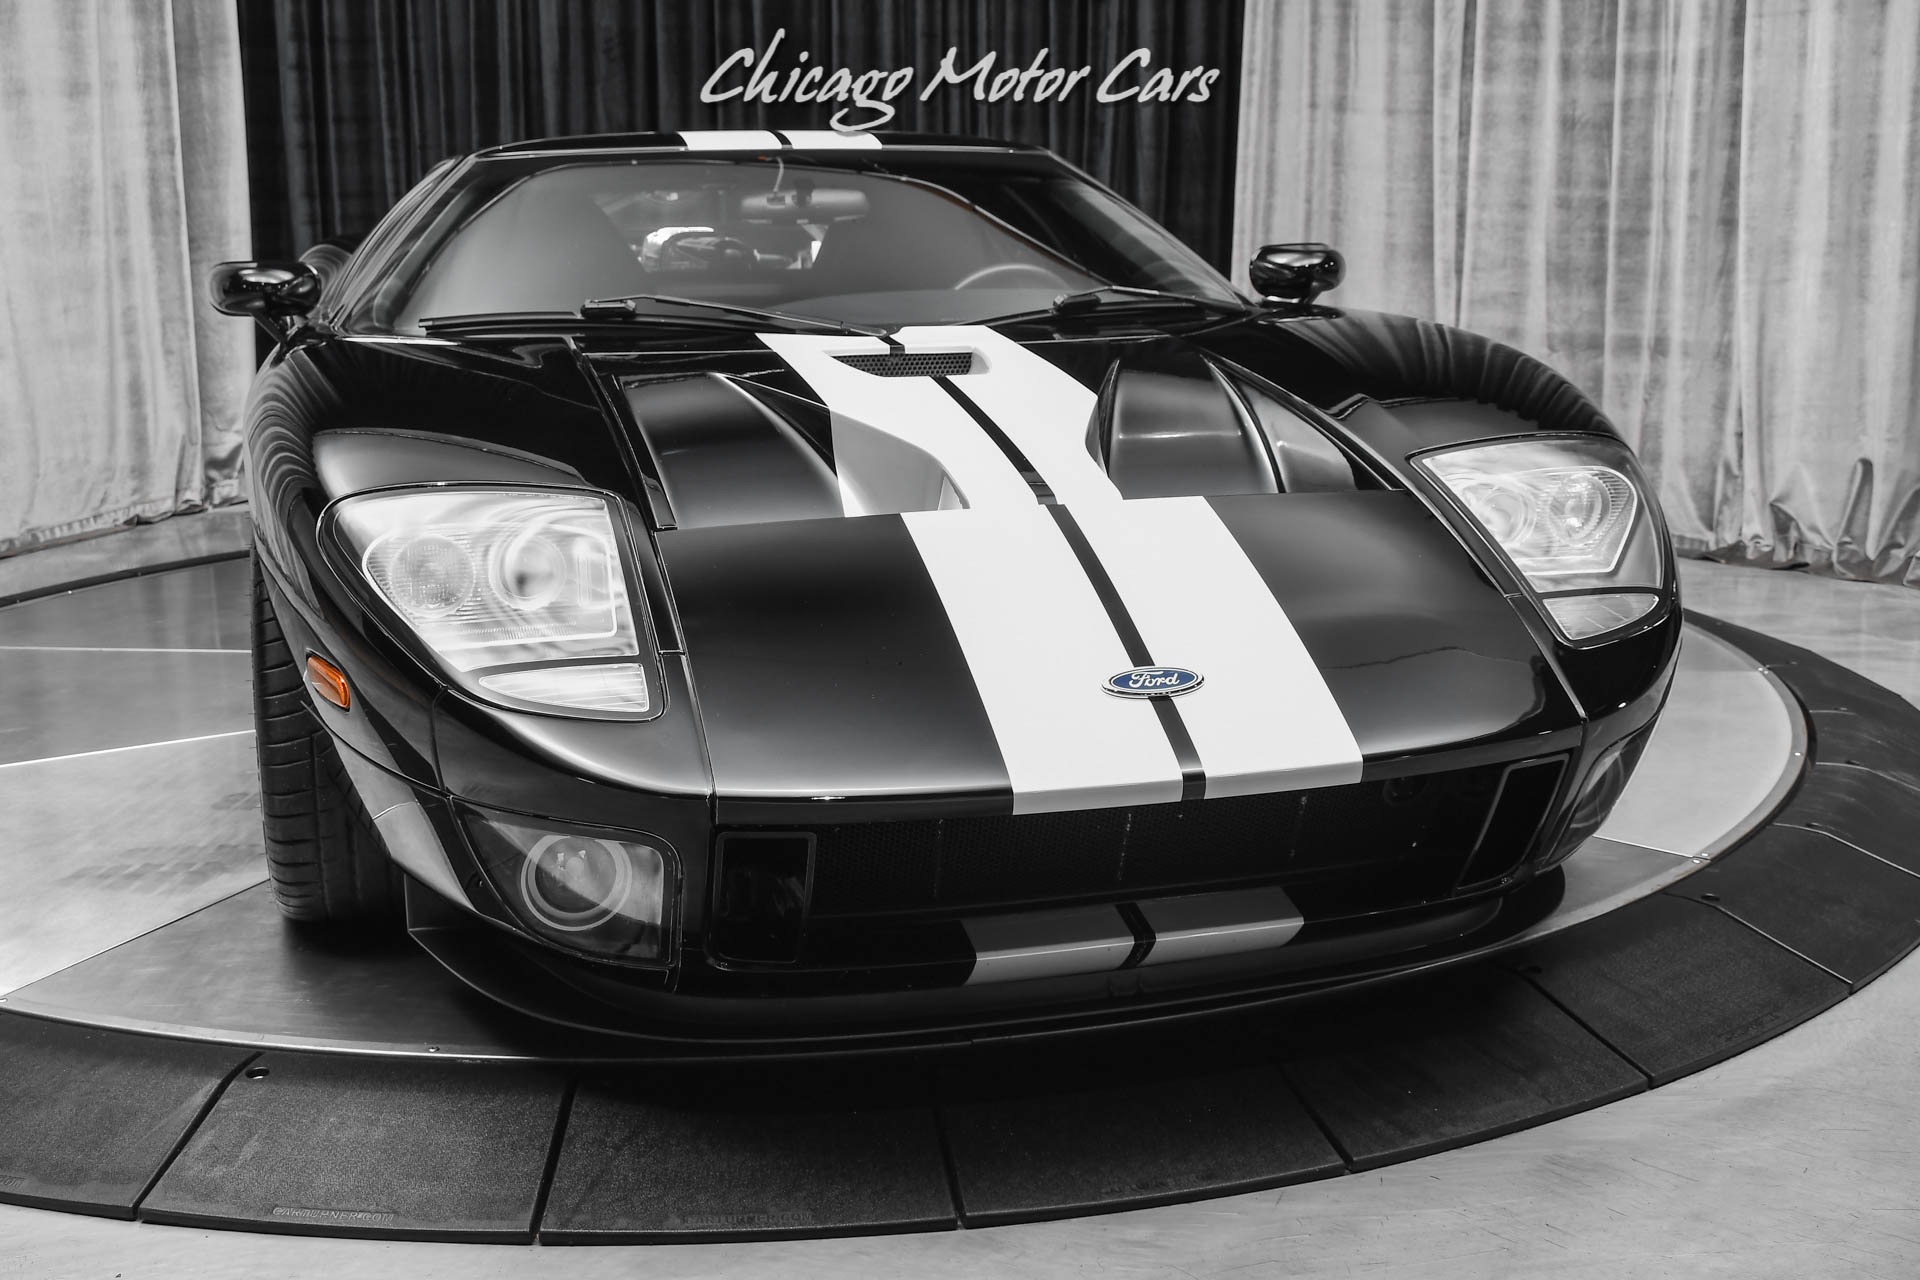 Used-2005-Ford-GT-Coupe-700HP-Black-HREs-WHIPPLE-Supercharger-All-Stock-Parts-Included